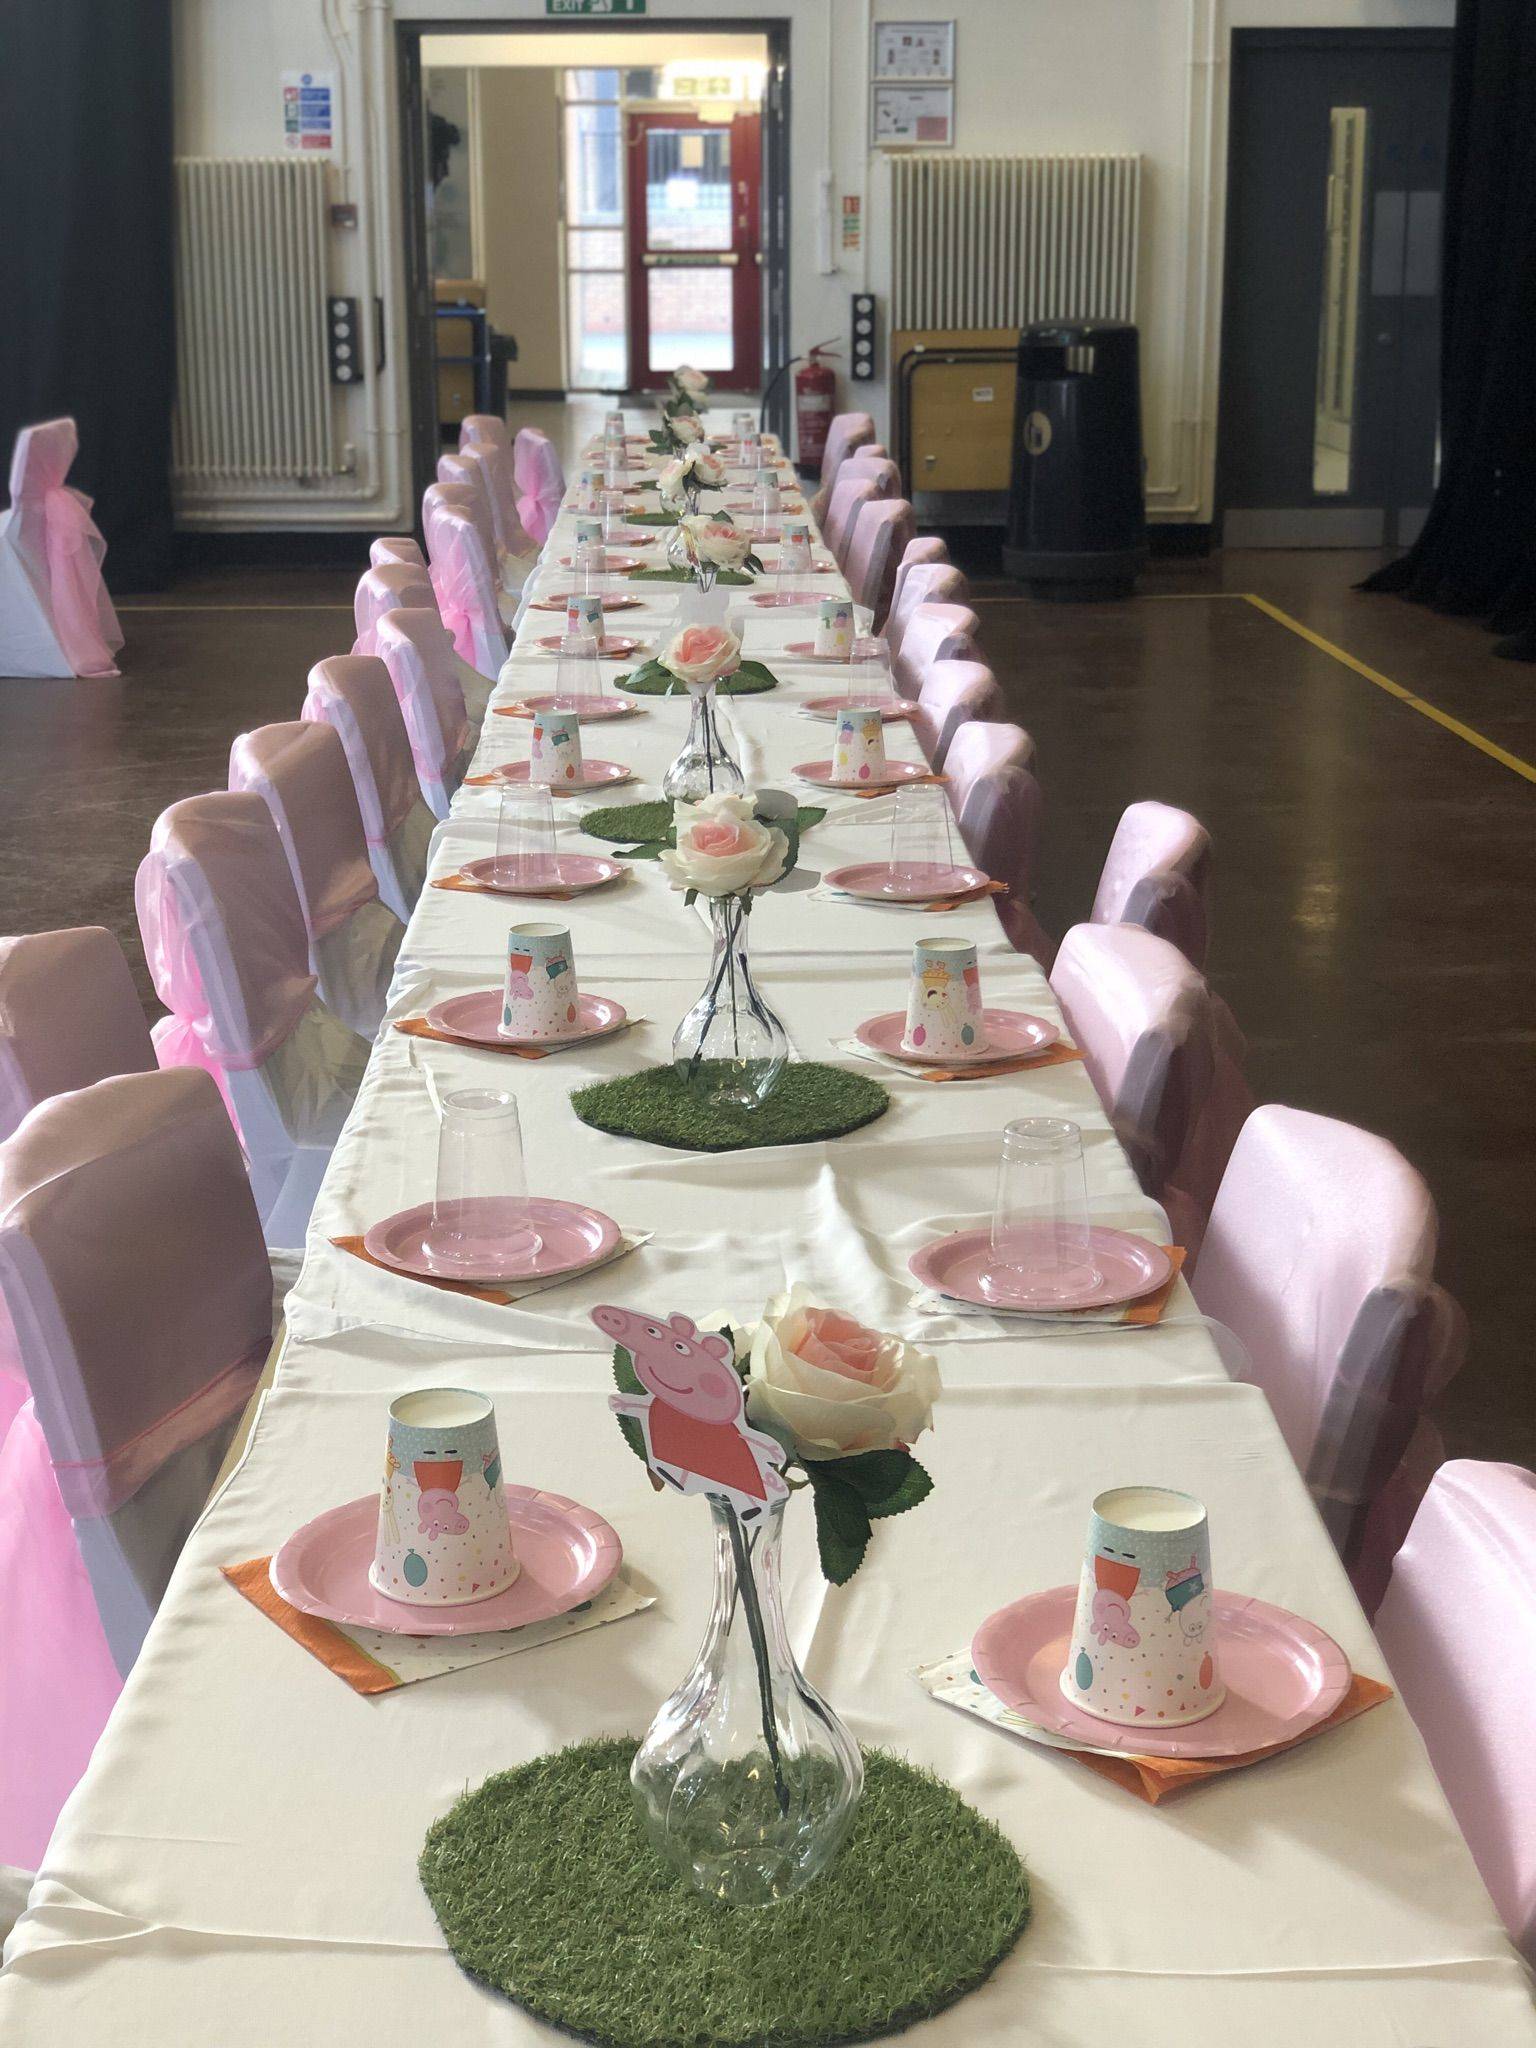 a long table with pink chairs and plates.